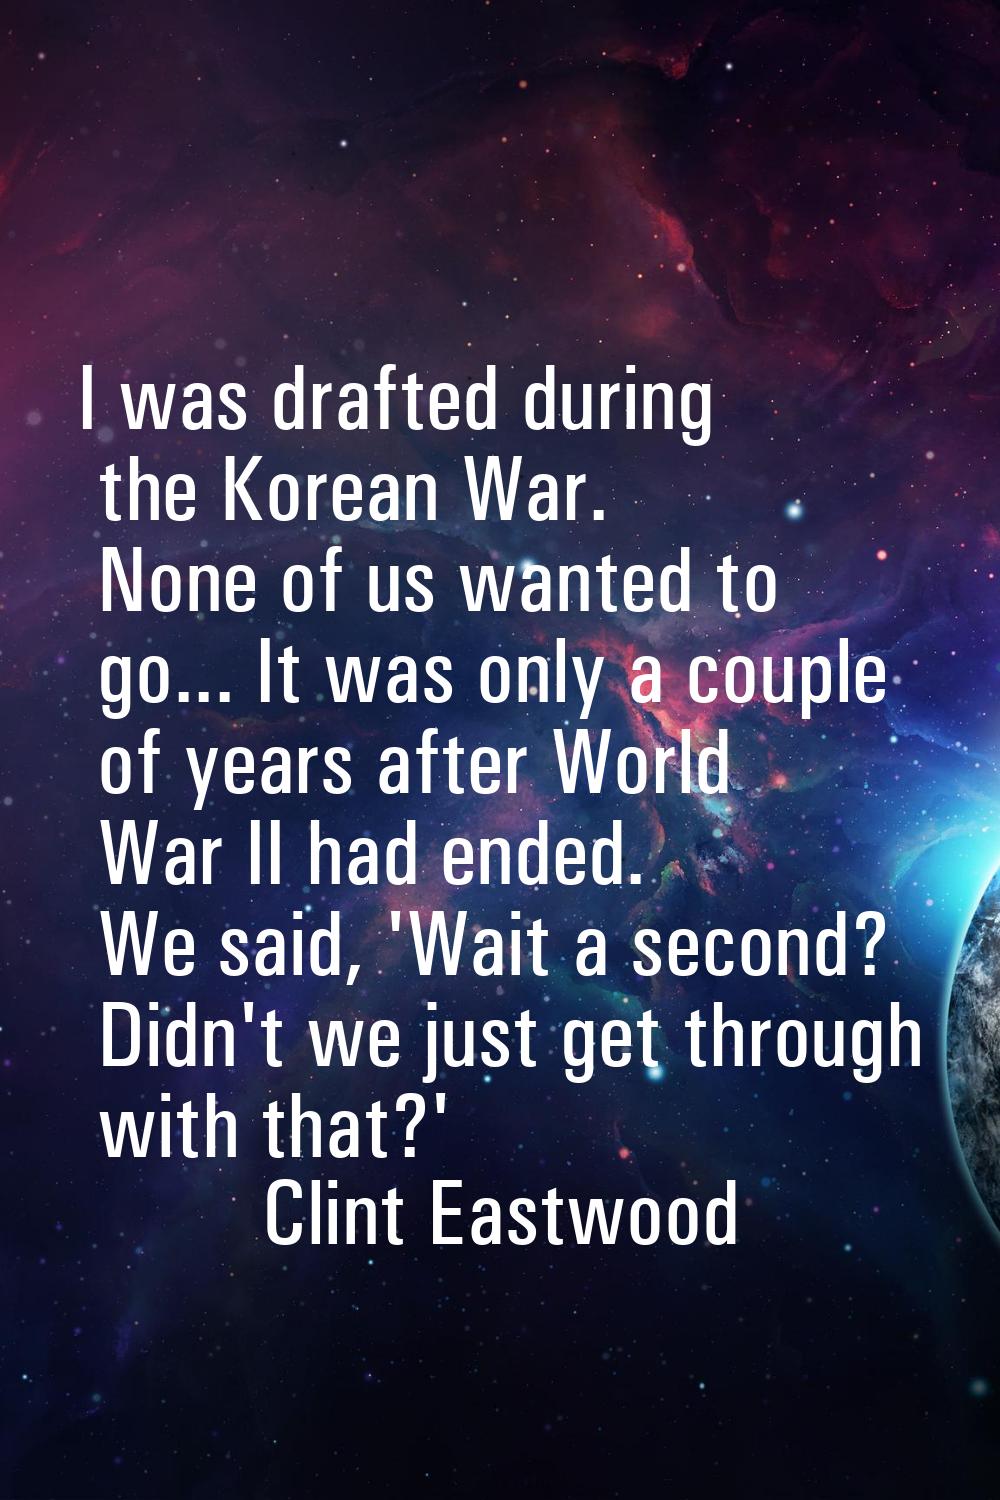 I was drafted during the Korean War. None of us wanted to go... It was only a couple of years after